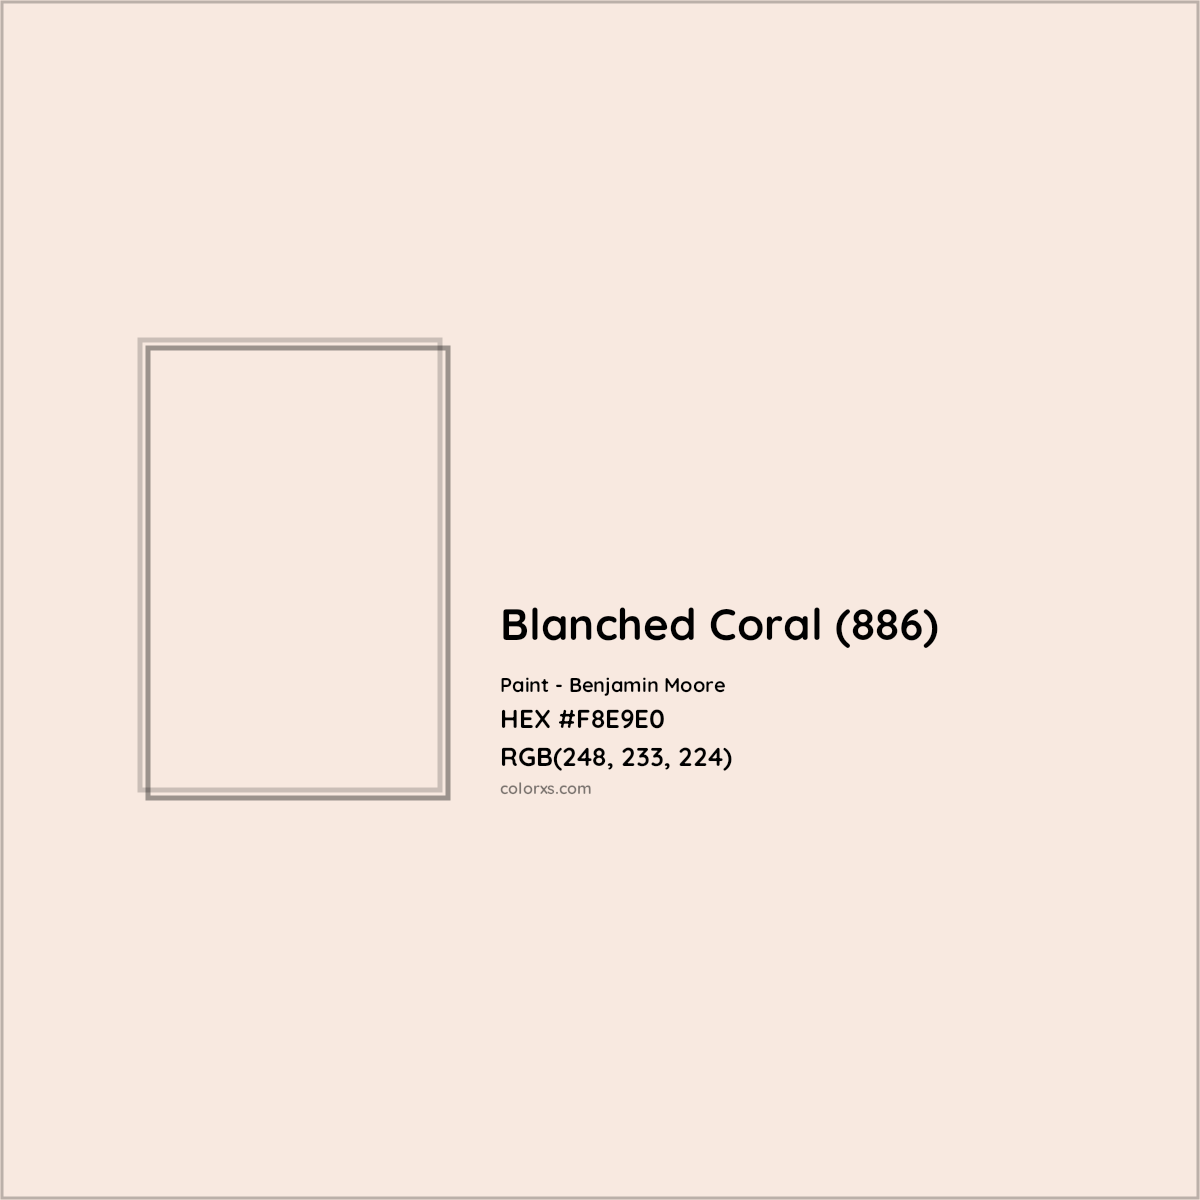 HEX #F8E9E0 Blanched Coral (886) Paint Benjamin Moore - Color Code